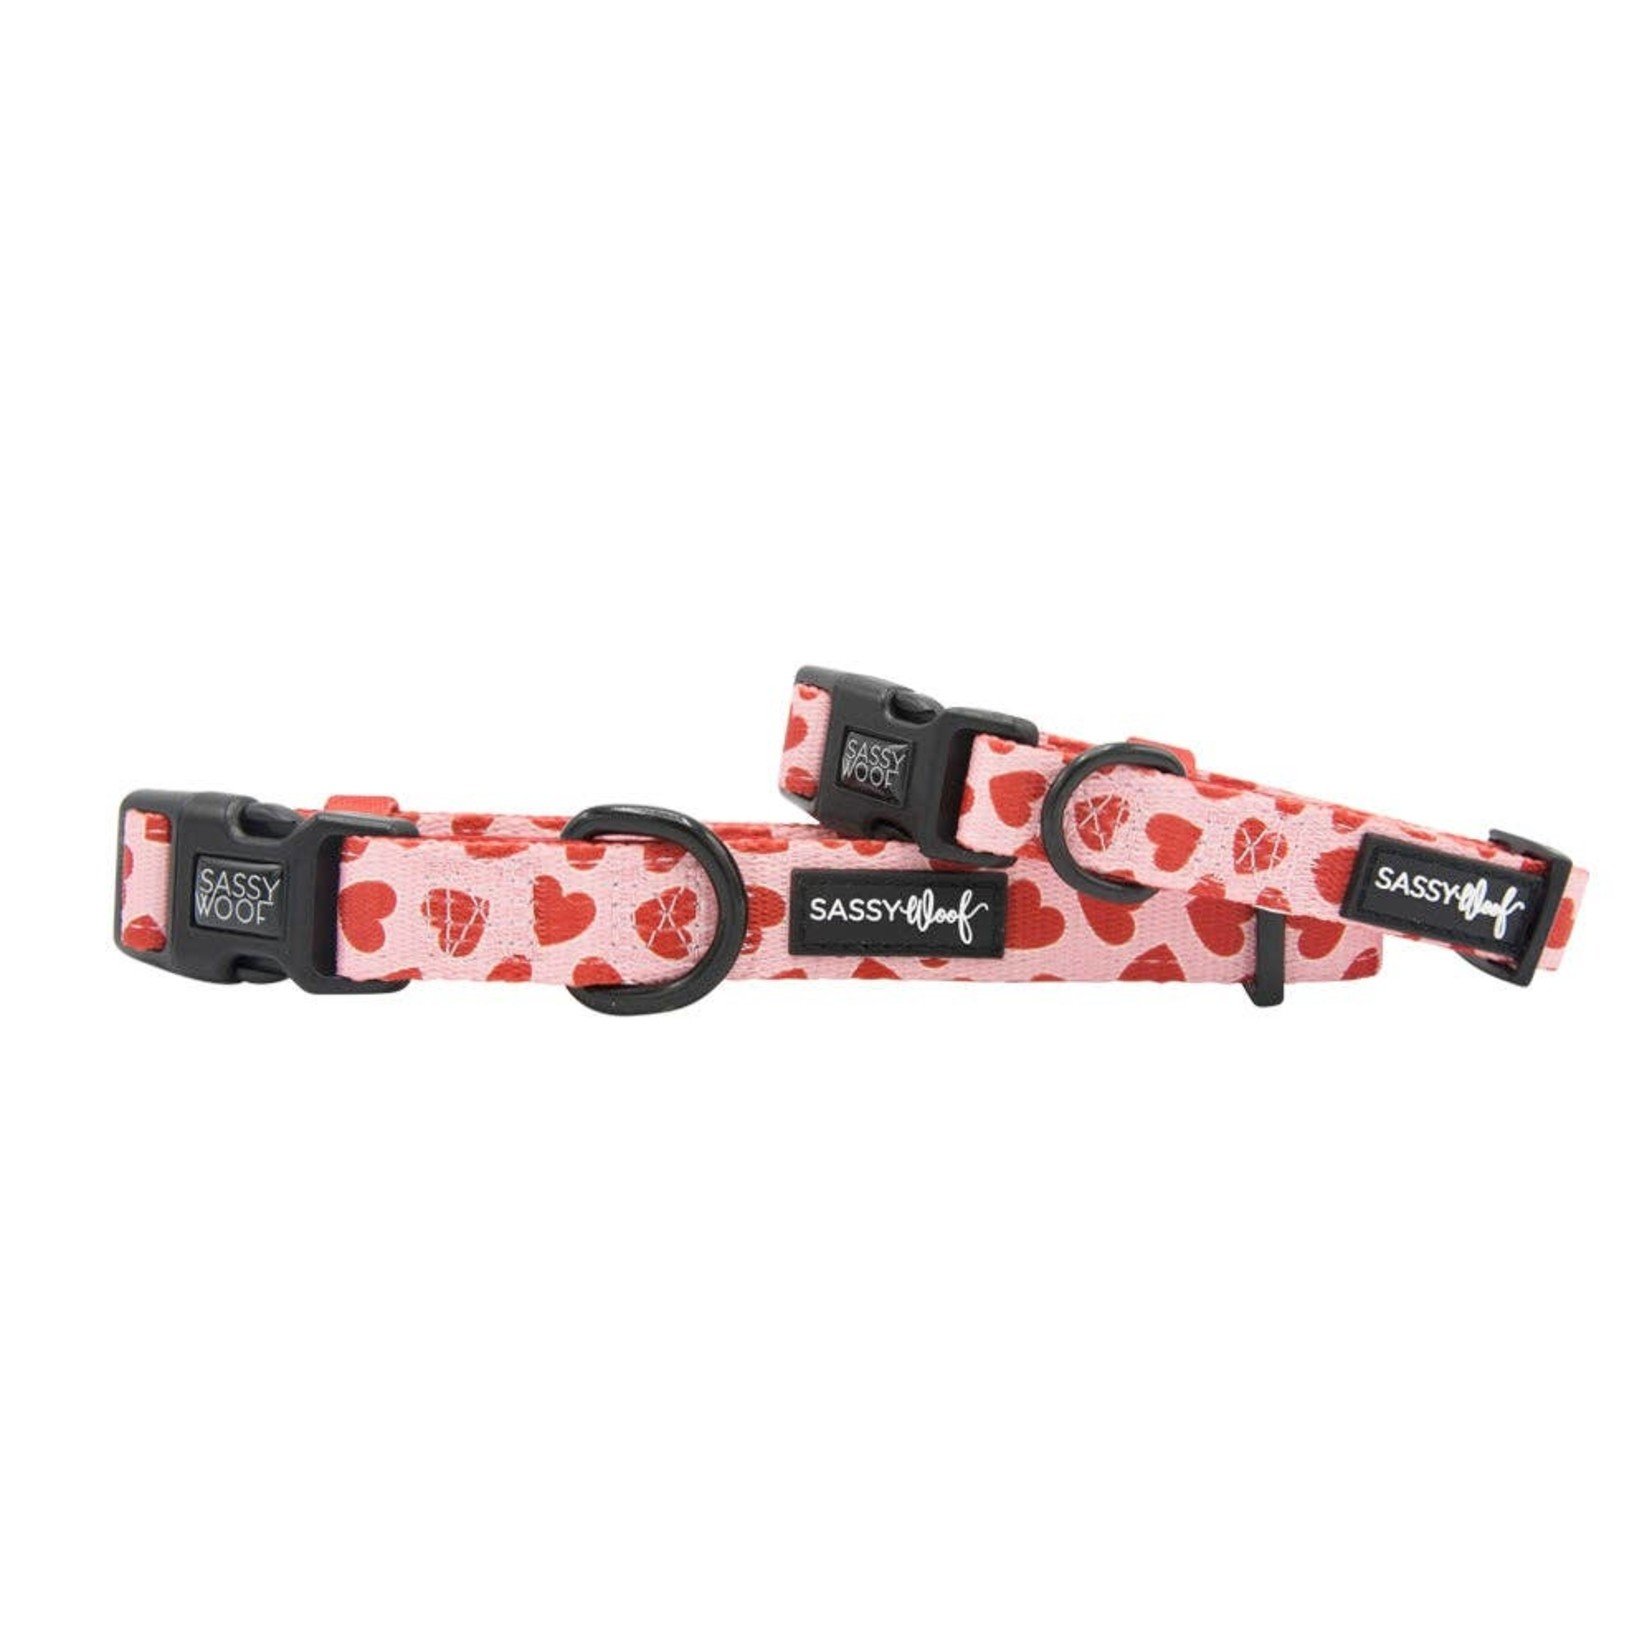 Sassy Woof Dog Collars & Leash in Love at First Bark